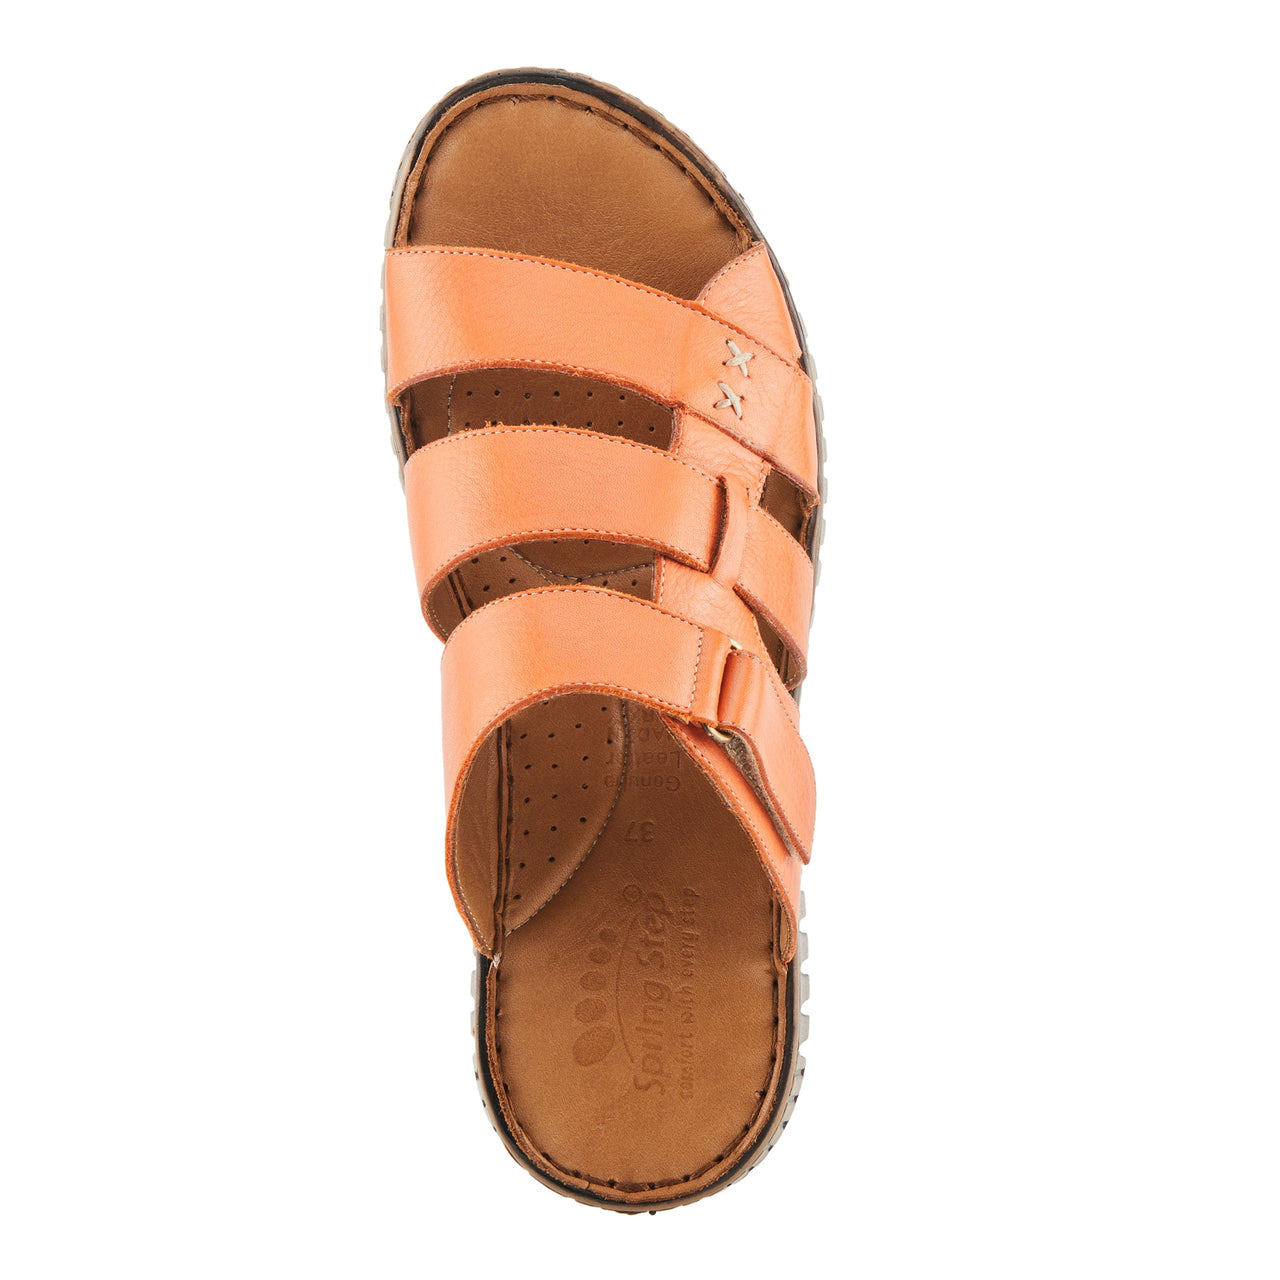 A pair of stylish and comfortable Spring Step Olly Sandals in brown leather, featuring cushioned insoles and adjustable straps